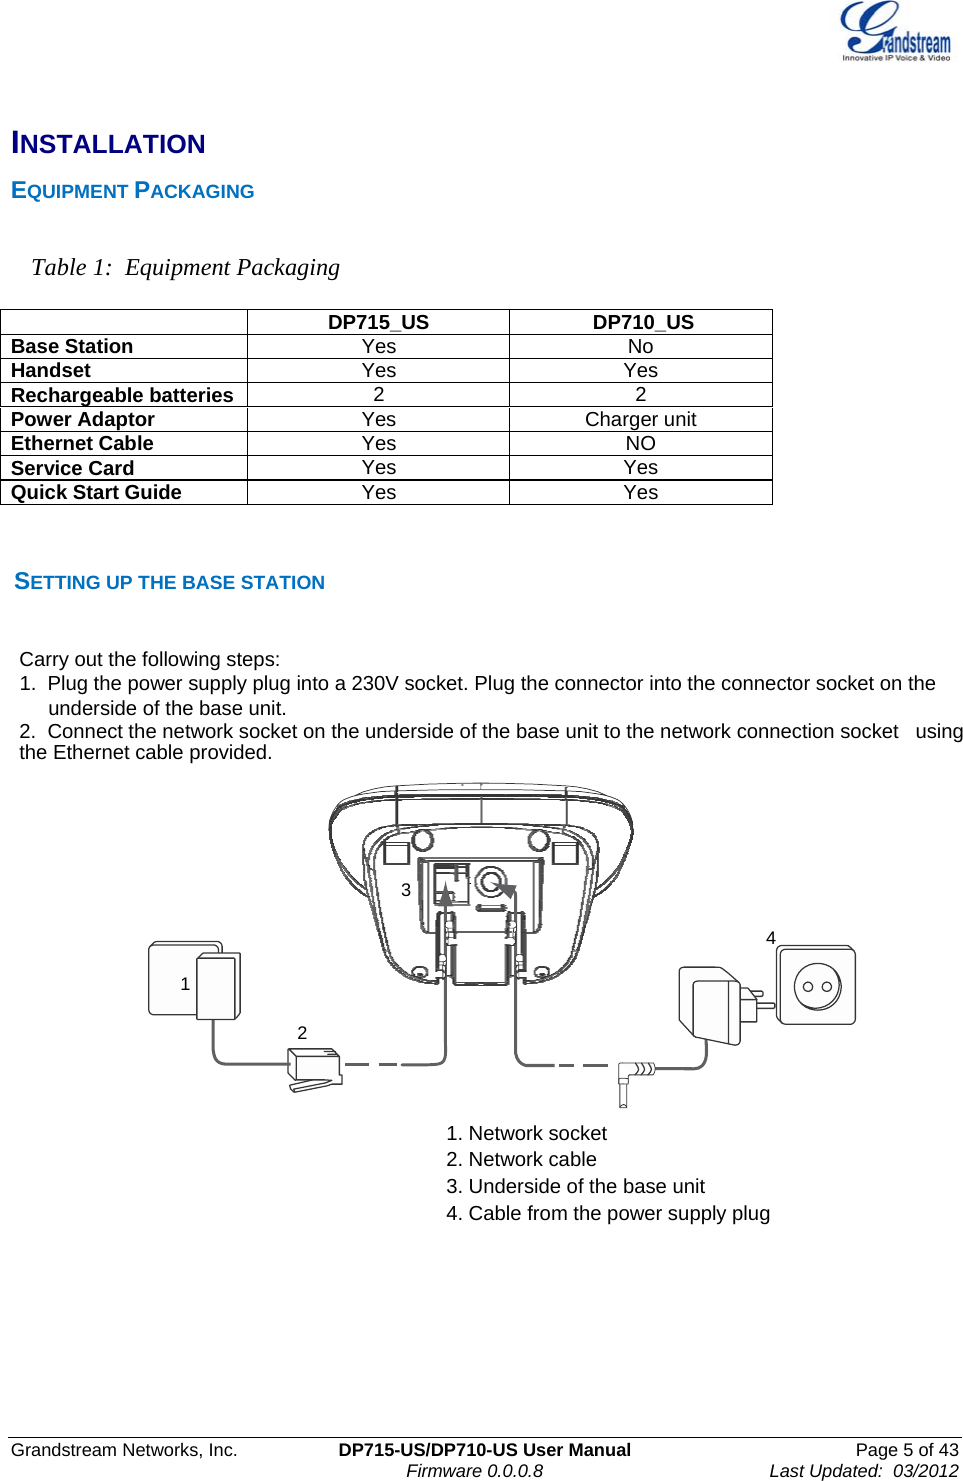  Grandstream Networks, Inc.  DP715-US/DP710-US User Manual  Page 5 of 43                                                                               Firmware 0.0.0.8                                     Last Updated:  03/2012  INSTALLATION EQUIPMENT PACKAGING  Table 1:  Equipment Packaging   DP715_US  DP710_US Base Station  Yes No Handset  Yes Yes Rechargeable batteries 2 2 Power Adaptor  Yes Charger unit Ethernet Cable  Yes NO Service Card  Yes Yes Quick Start Guide  Yes Yes        SETTING UP THE BASE STATION  Carry out the following steps: 1.  Plug the power supply plug into a 230V socket. Plug the connector into the connector socket on the underside of the base unit. 2.  Connect the network socket on the underside of the base unit to the network connection socket   using the Ethernet cable provided.            3       4                          1                        2     1. Network socket 2. Network cable 3. Underside of the base unit 4. Cable from the power supply plug            